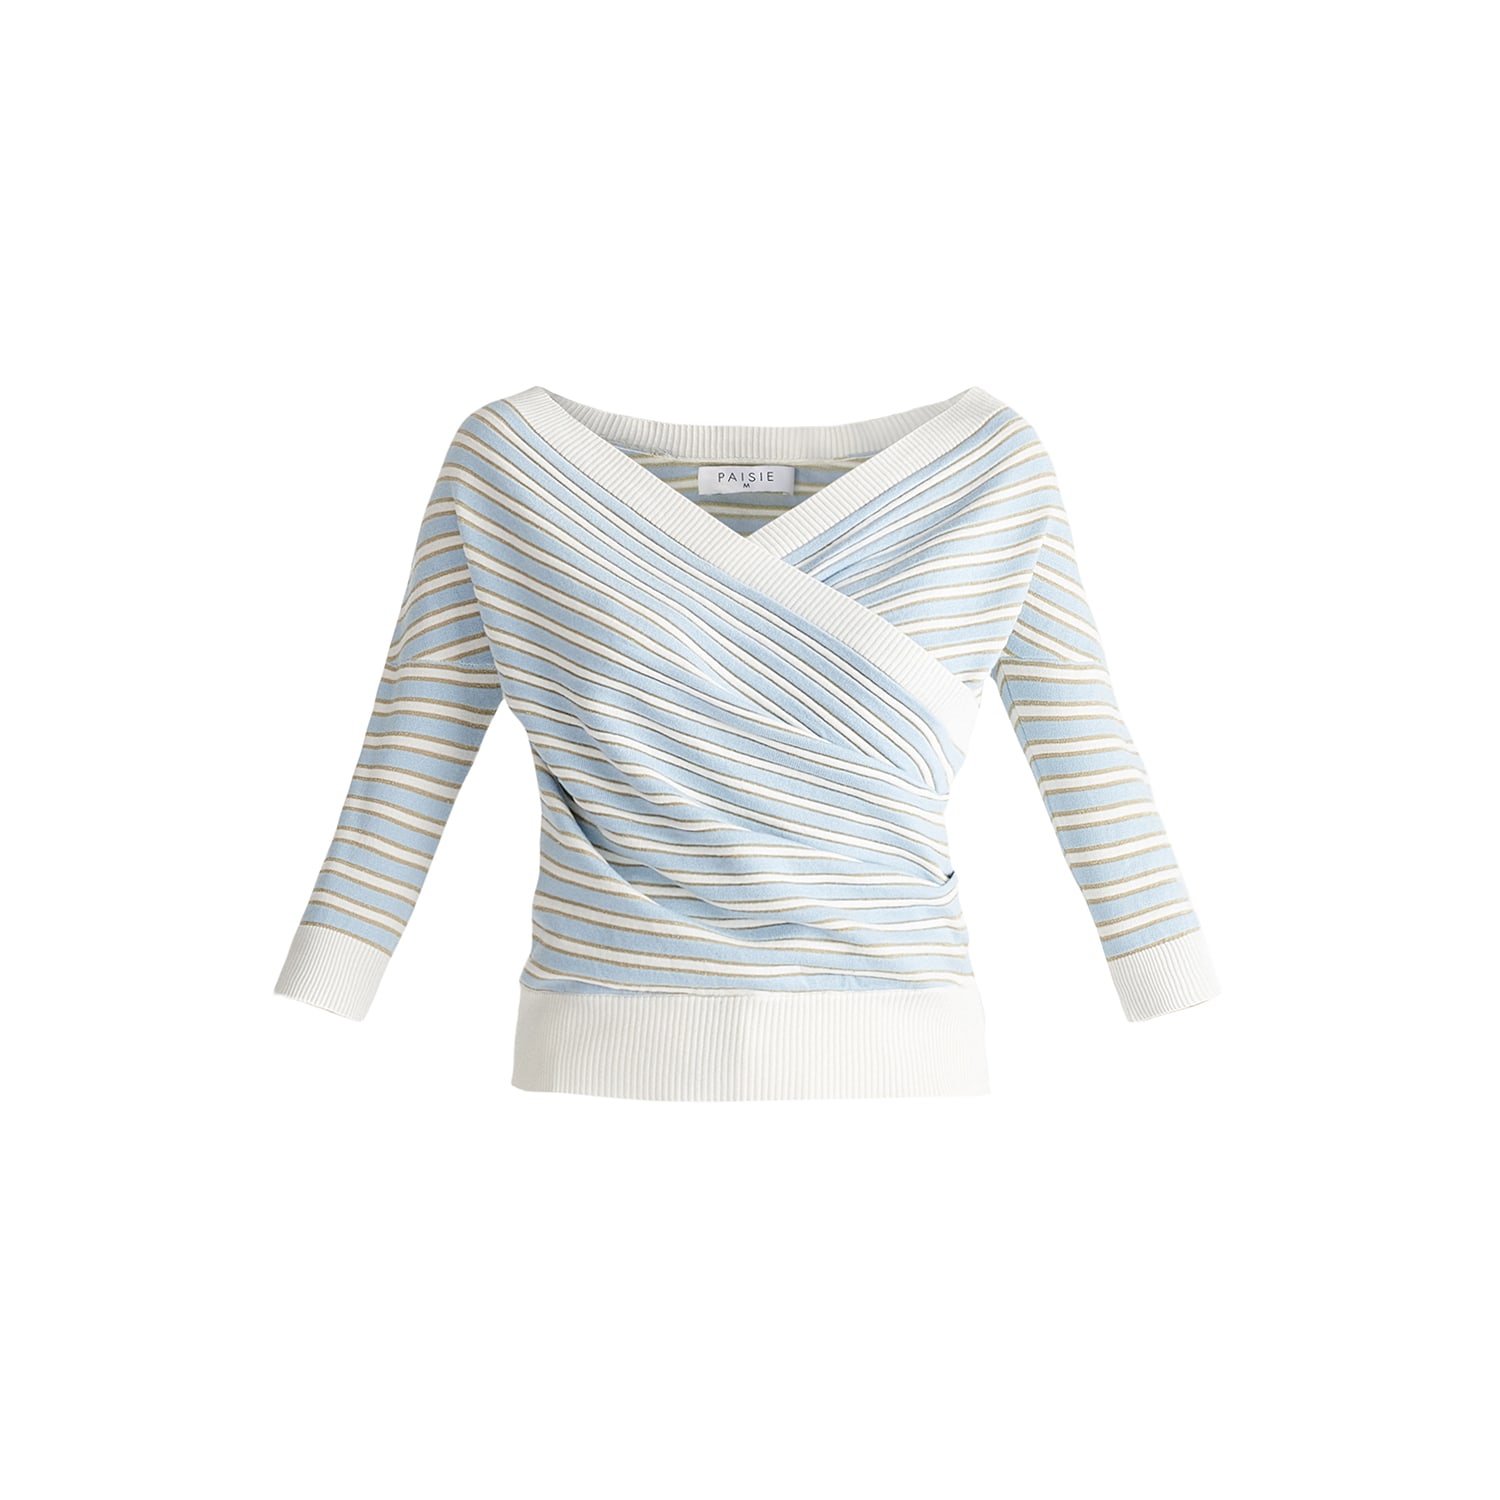 Paisie Women's Gold / Blue / White Knitted Wrap Top In Gold, Light Blue & White